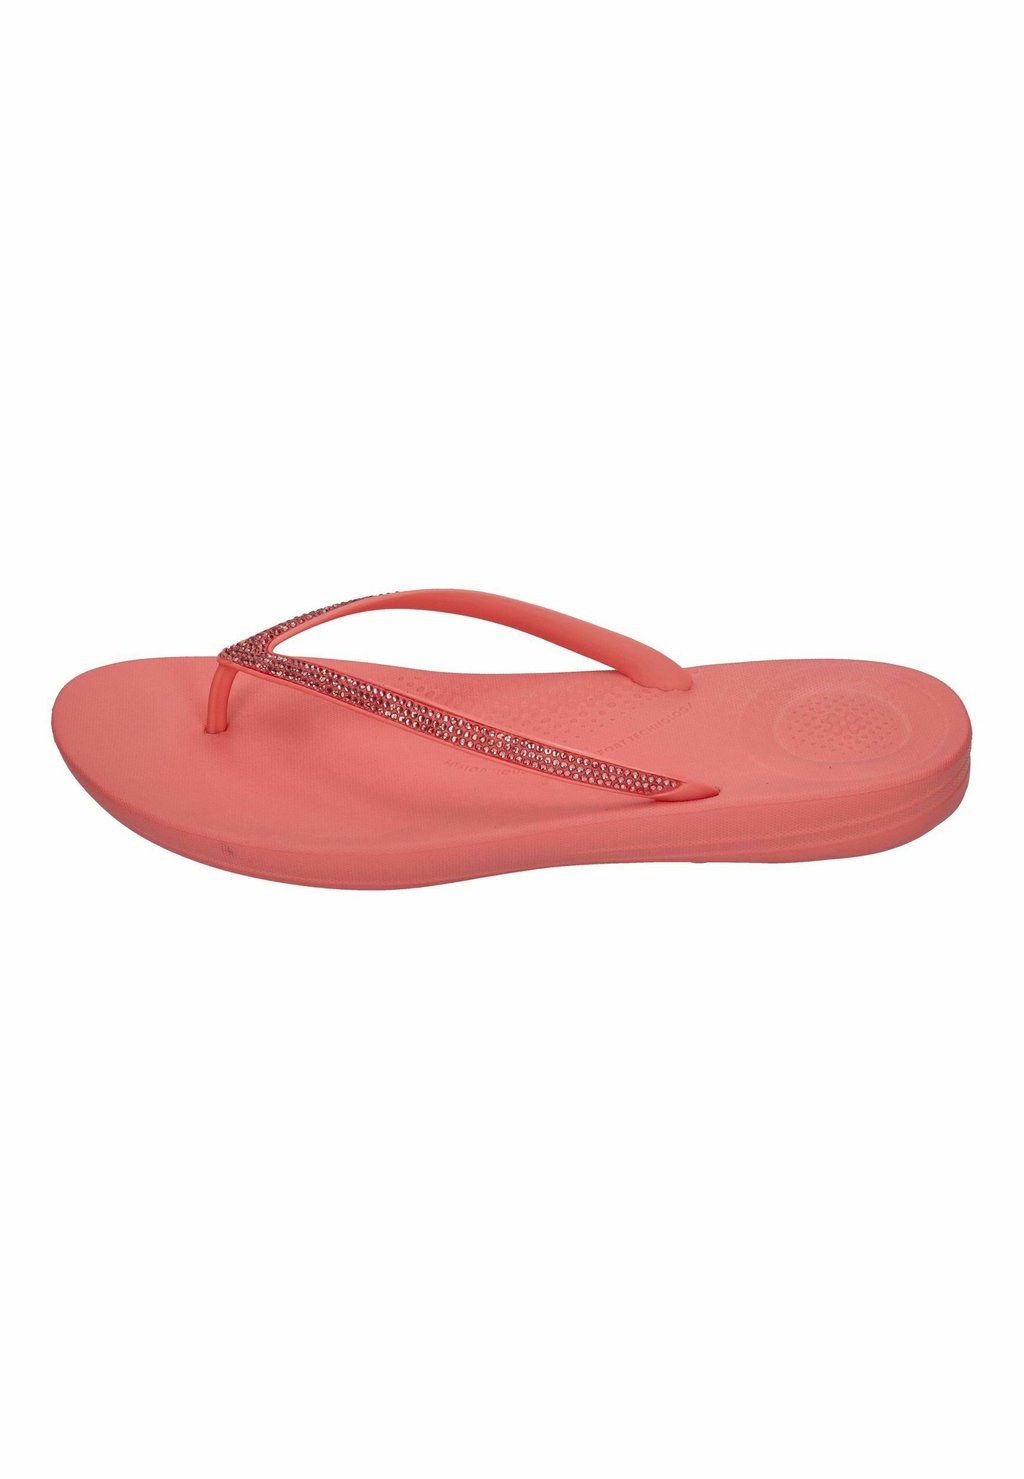 Сандалии ZEHENTRENNER IQUSHION SPARKLE R08 FitFlop, цвет rosy coral